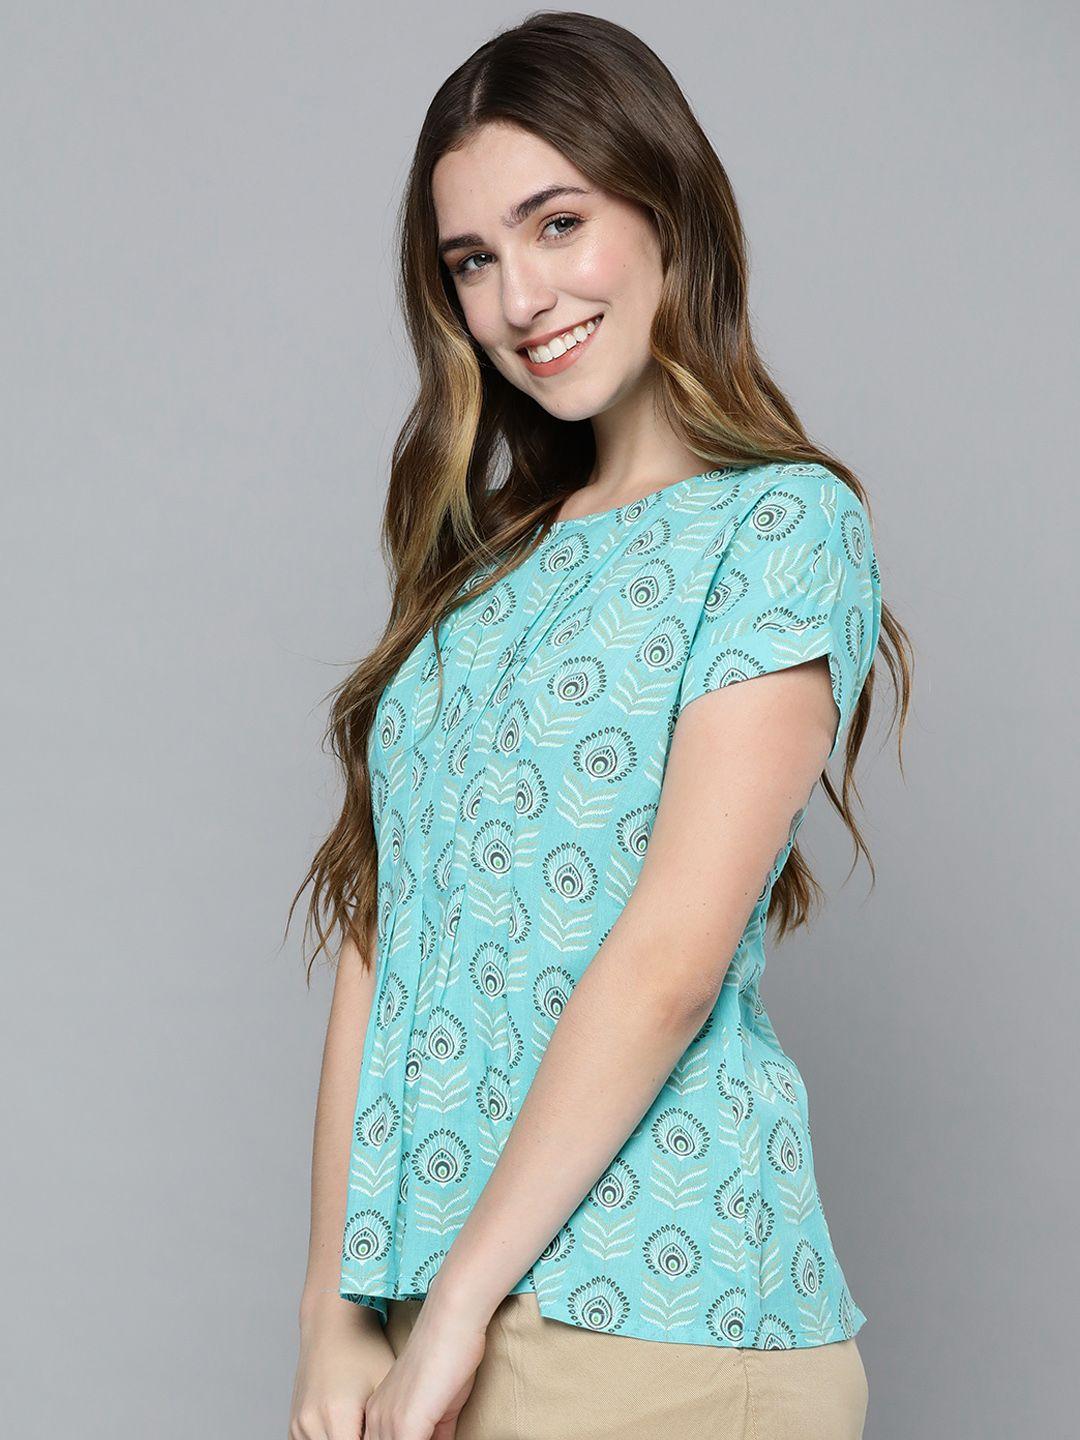 here&now sea green & white printed pure cotton extended sleeves top